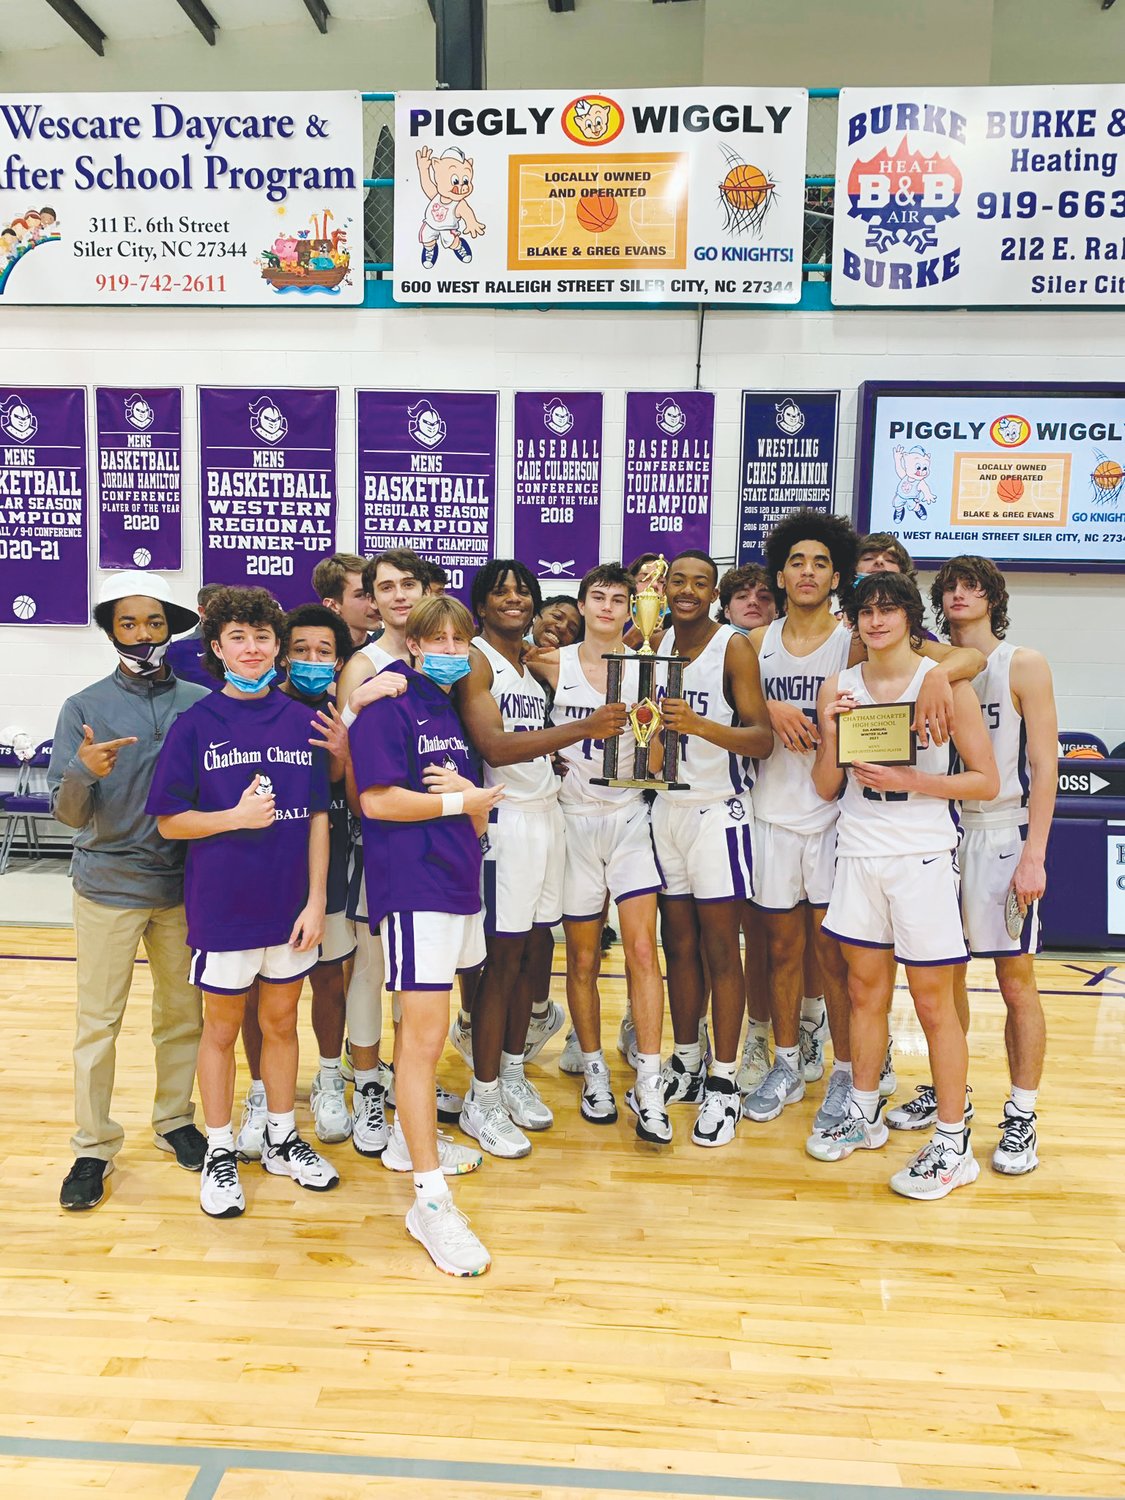 The Chatham Charter men's basketball team poses for photos after defeating the Research Triangle Raptors, 60-59, in the championship game of the 2021 Chatham Charter Winter Slam on Dec. 22.